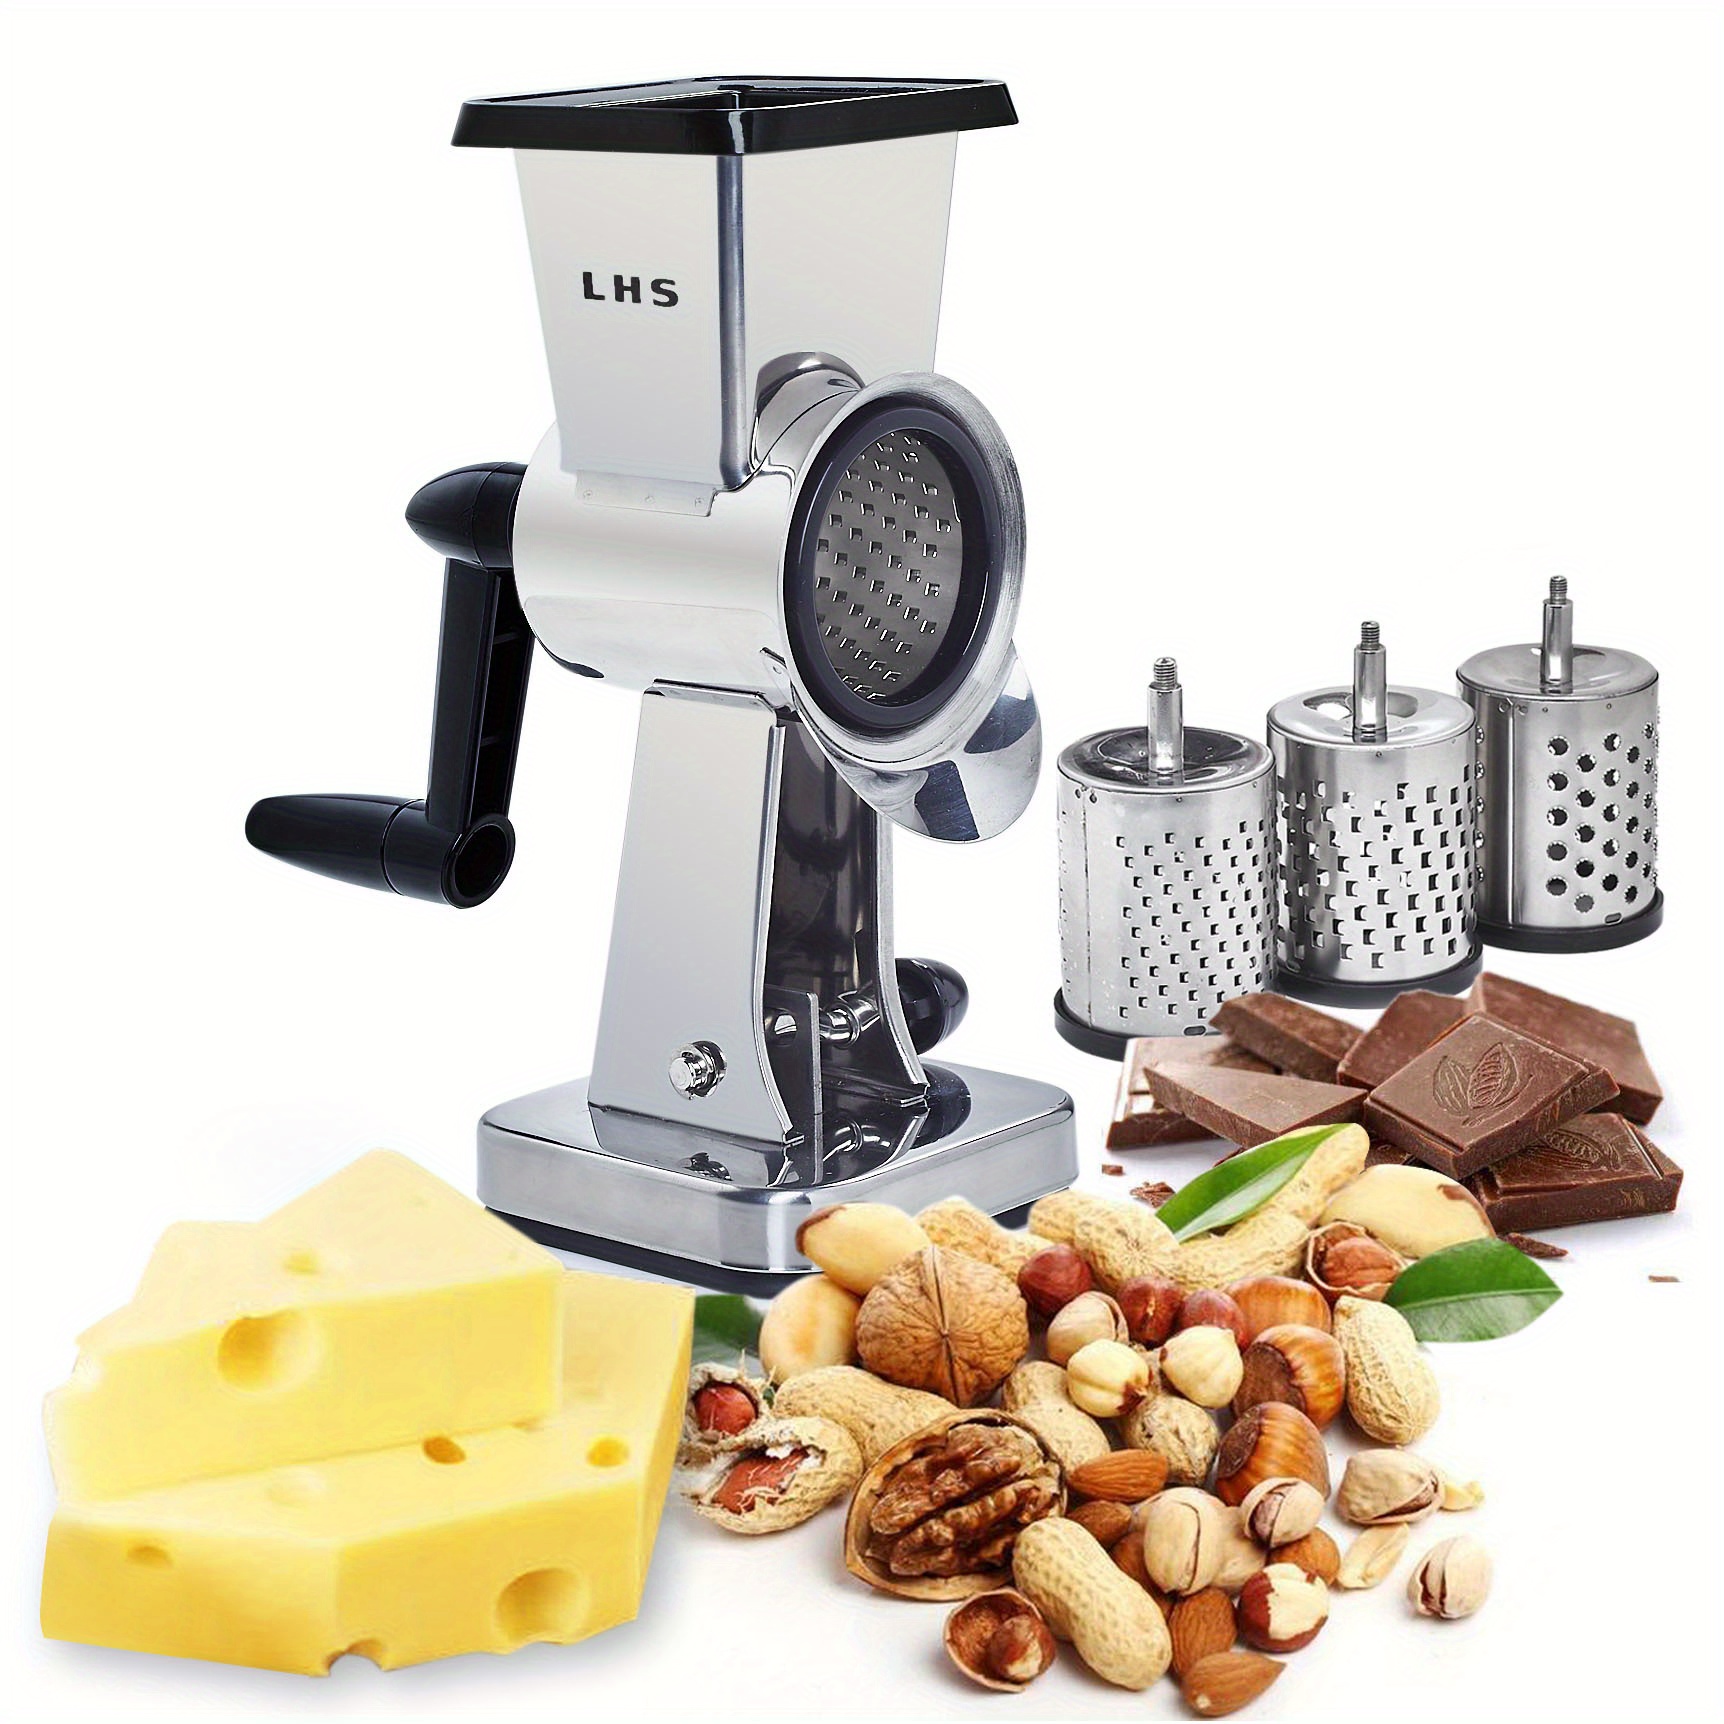 Dropship Cheese Grater 2 Pattern Blade Kitchen Gadgets Chocolate